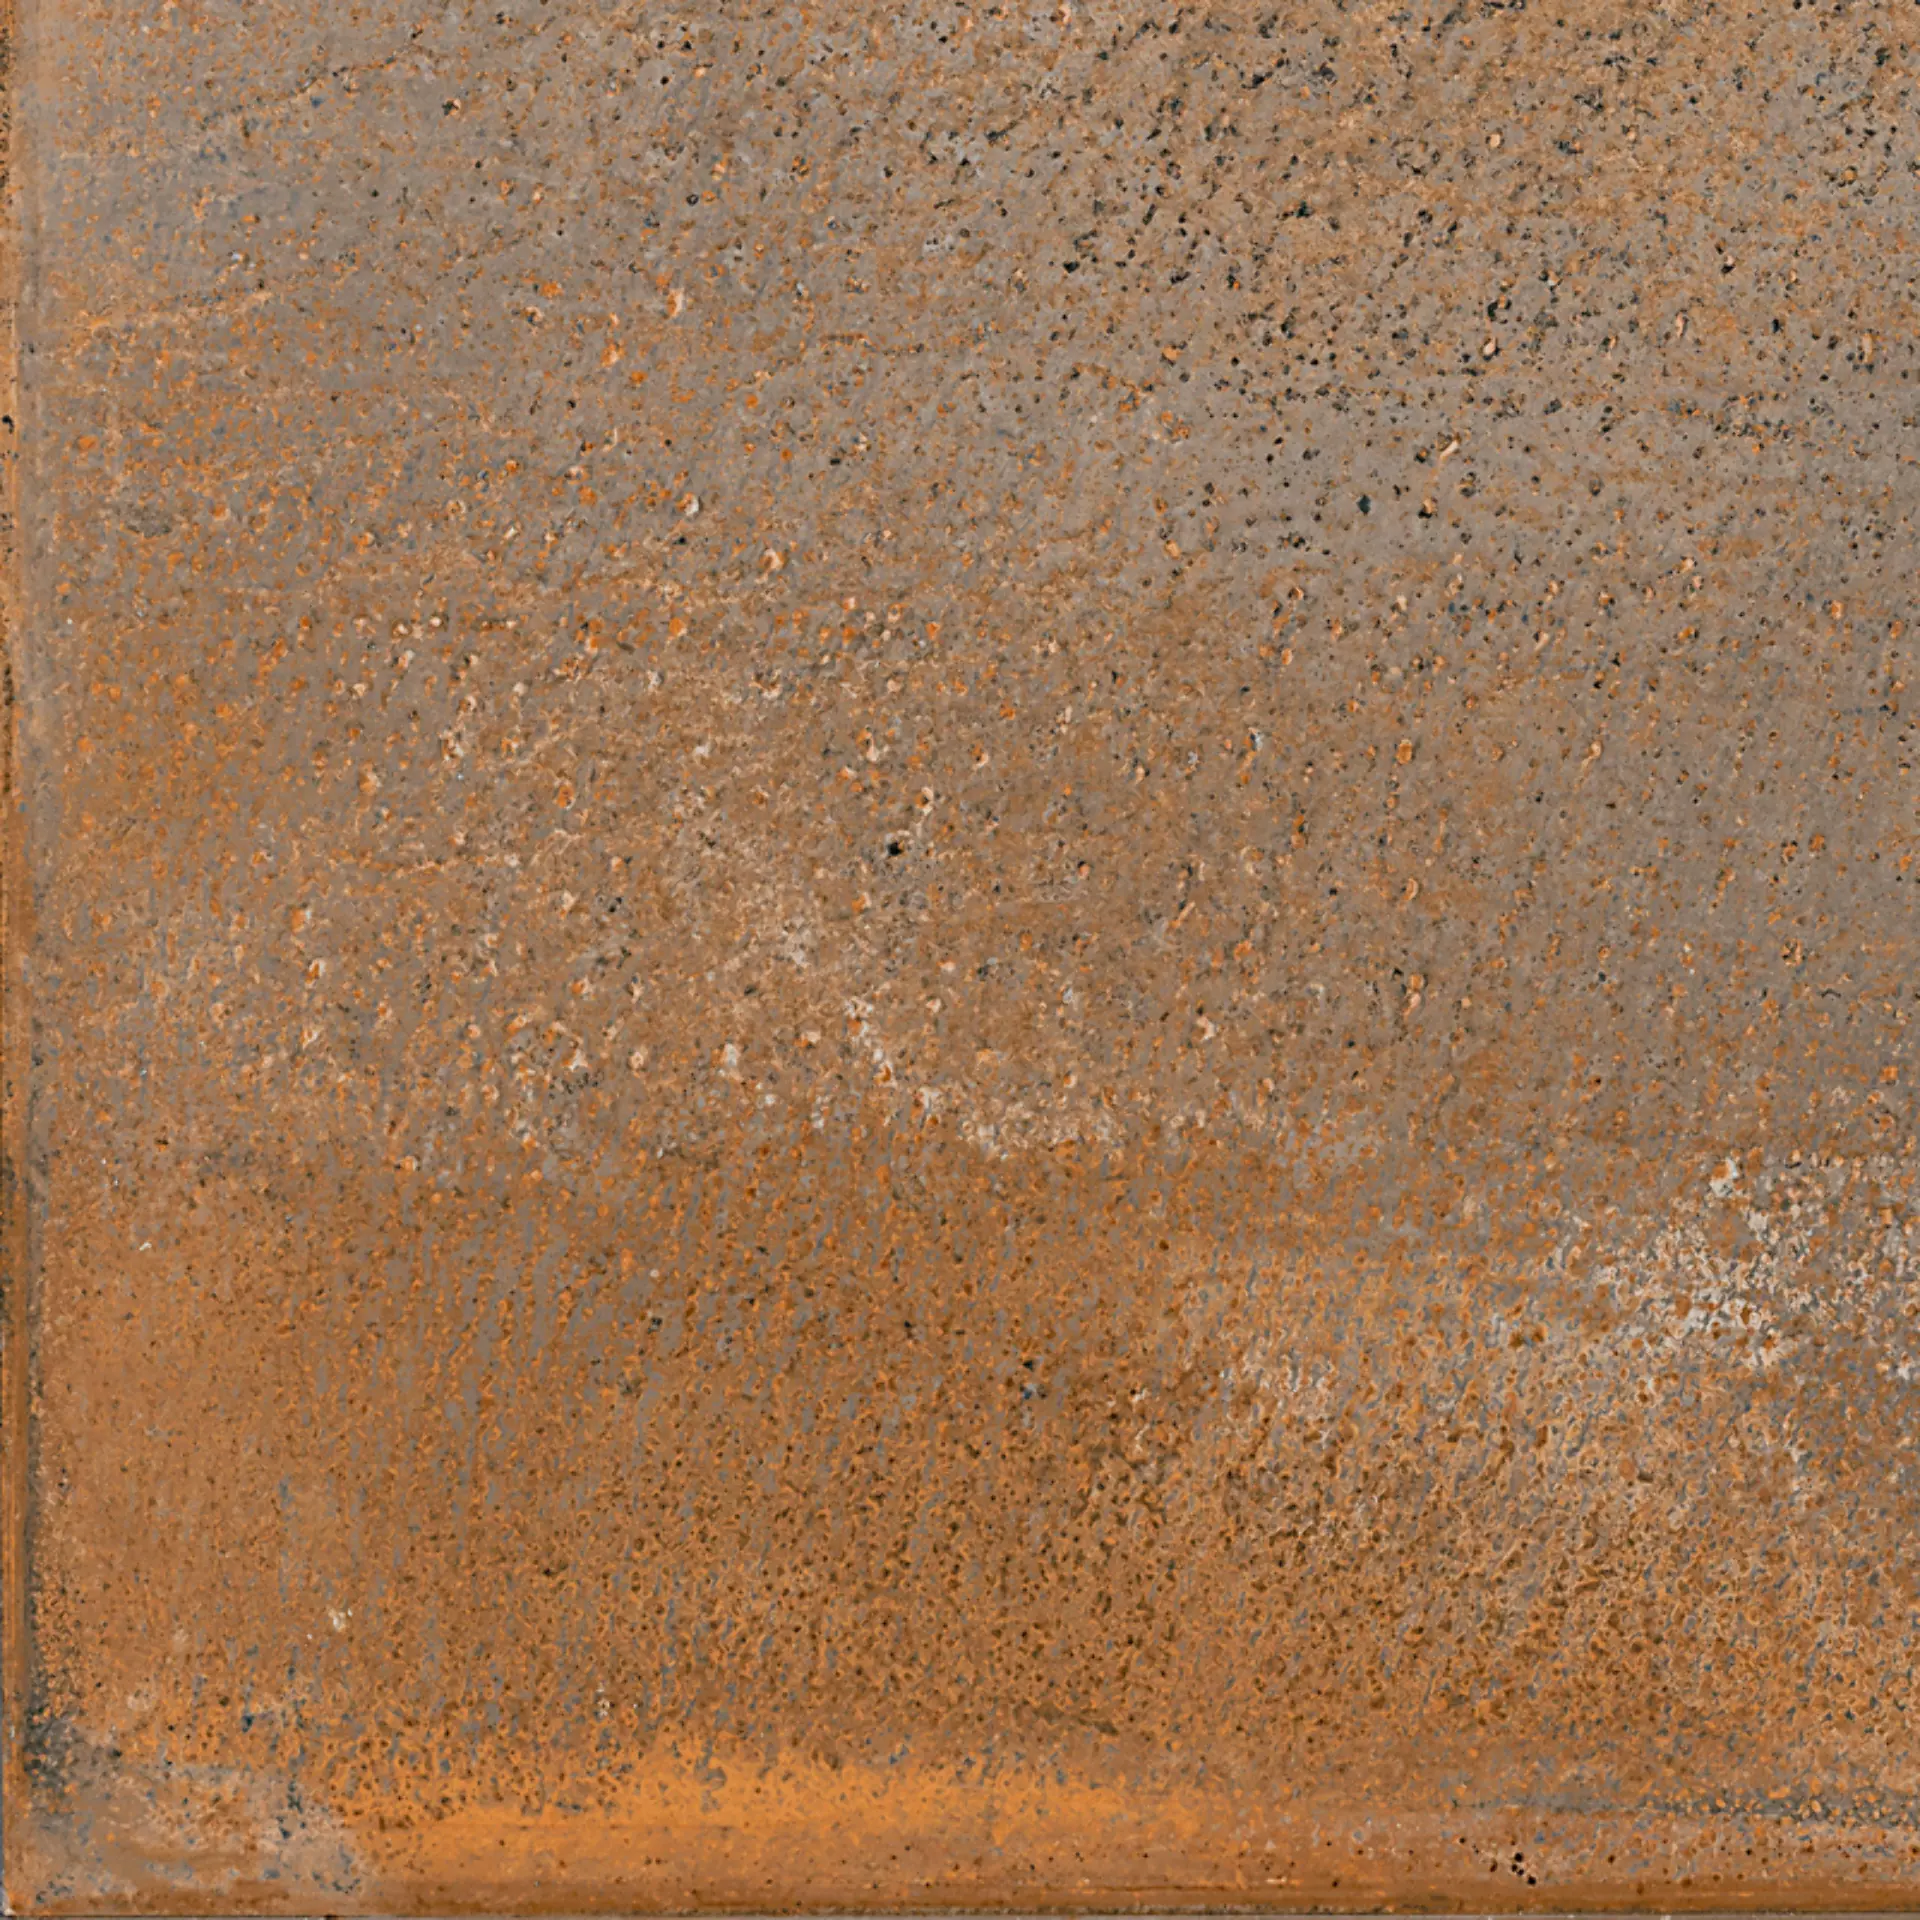 Sant Agostino Oxidart Copper Natural CSAOXCOP20 20x20cm rectified 10mm